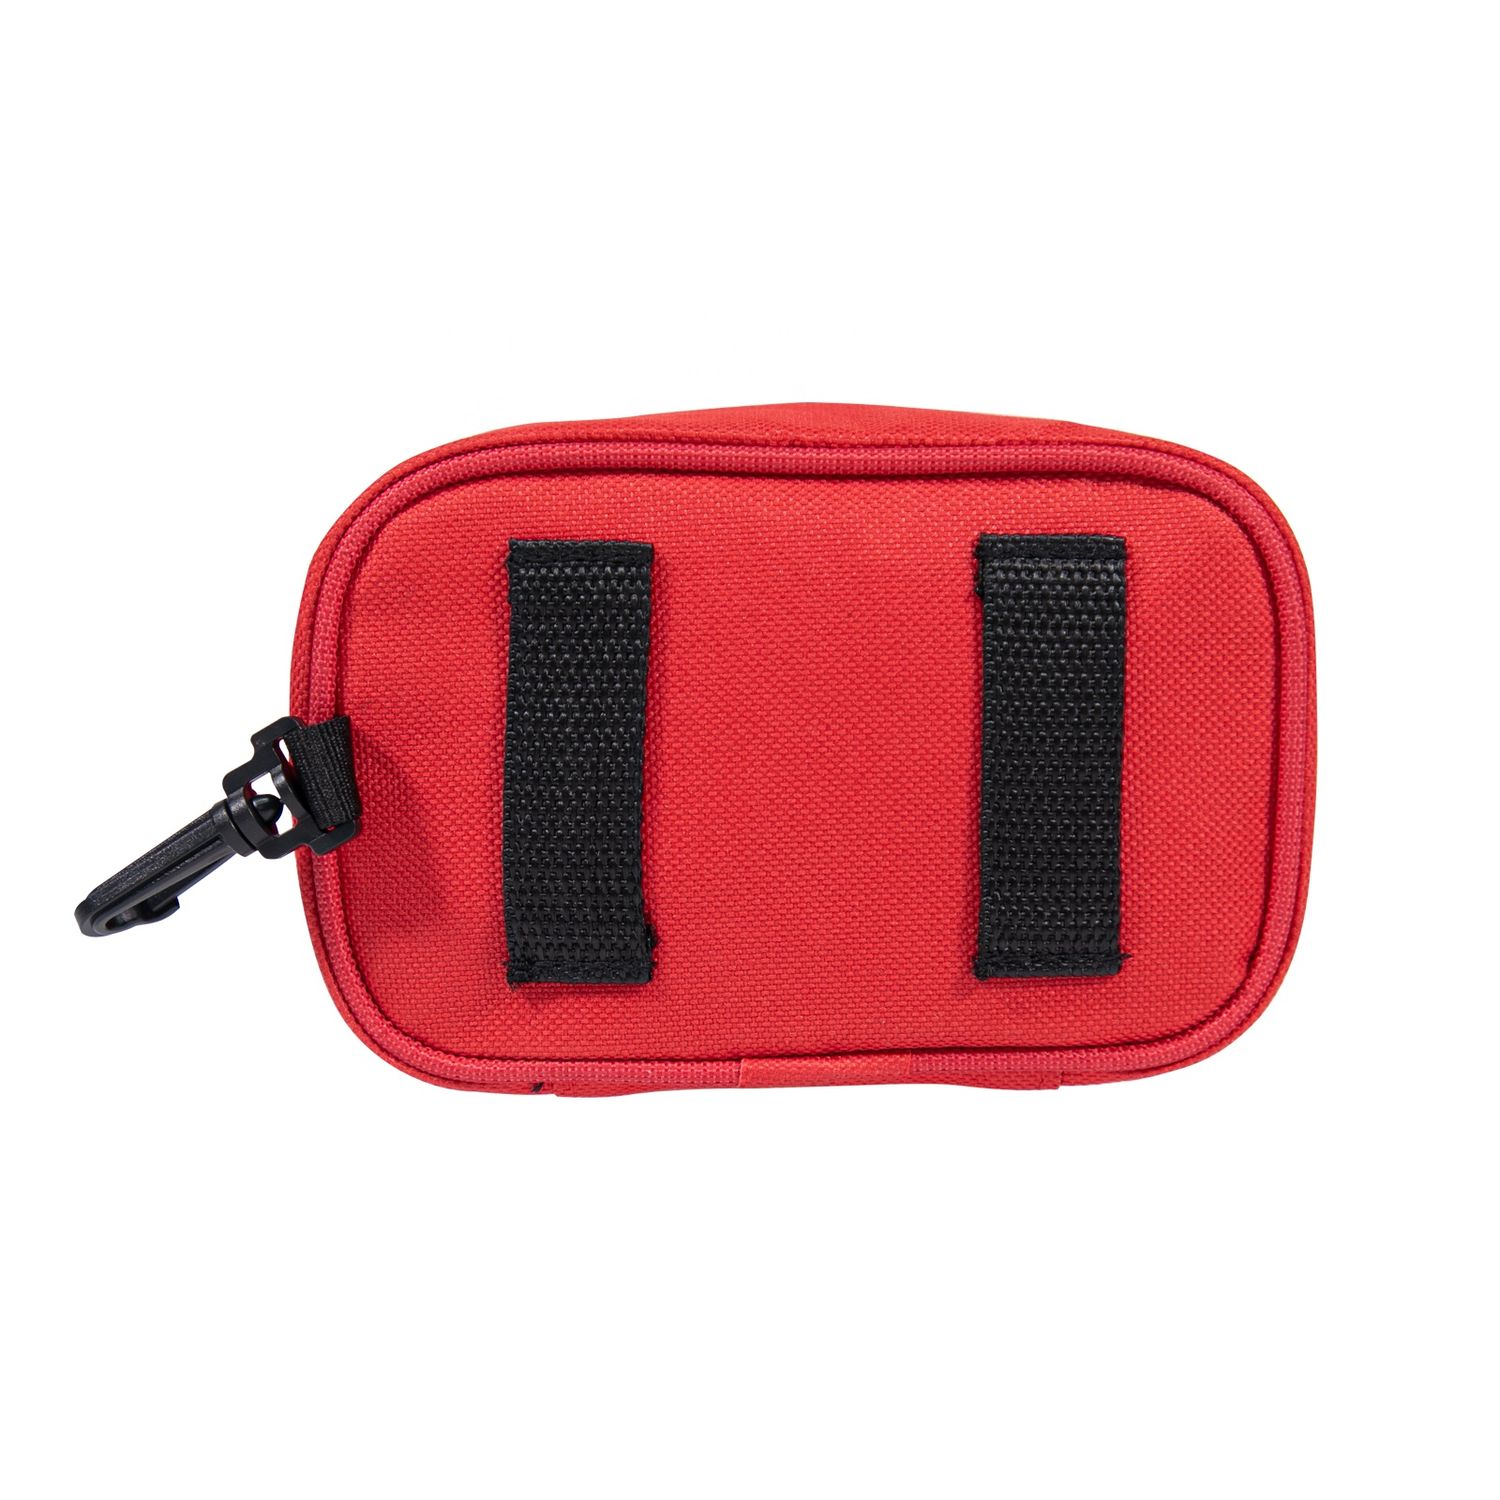 outside of Customized Tiny Cute Pet Essential First Aid Kit for Dogs and Cats